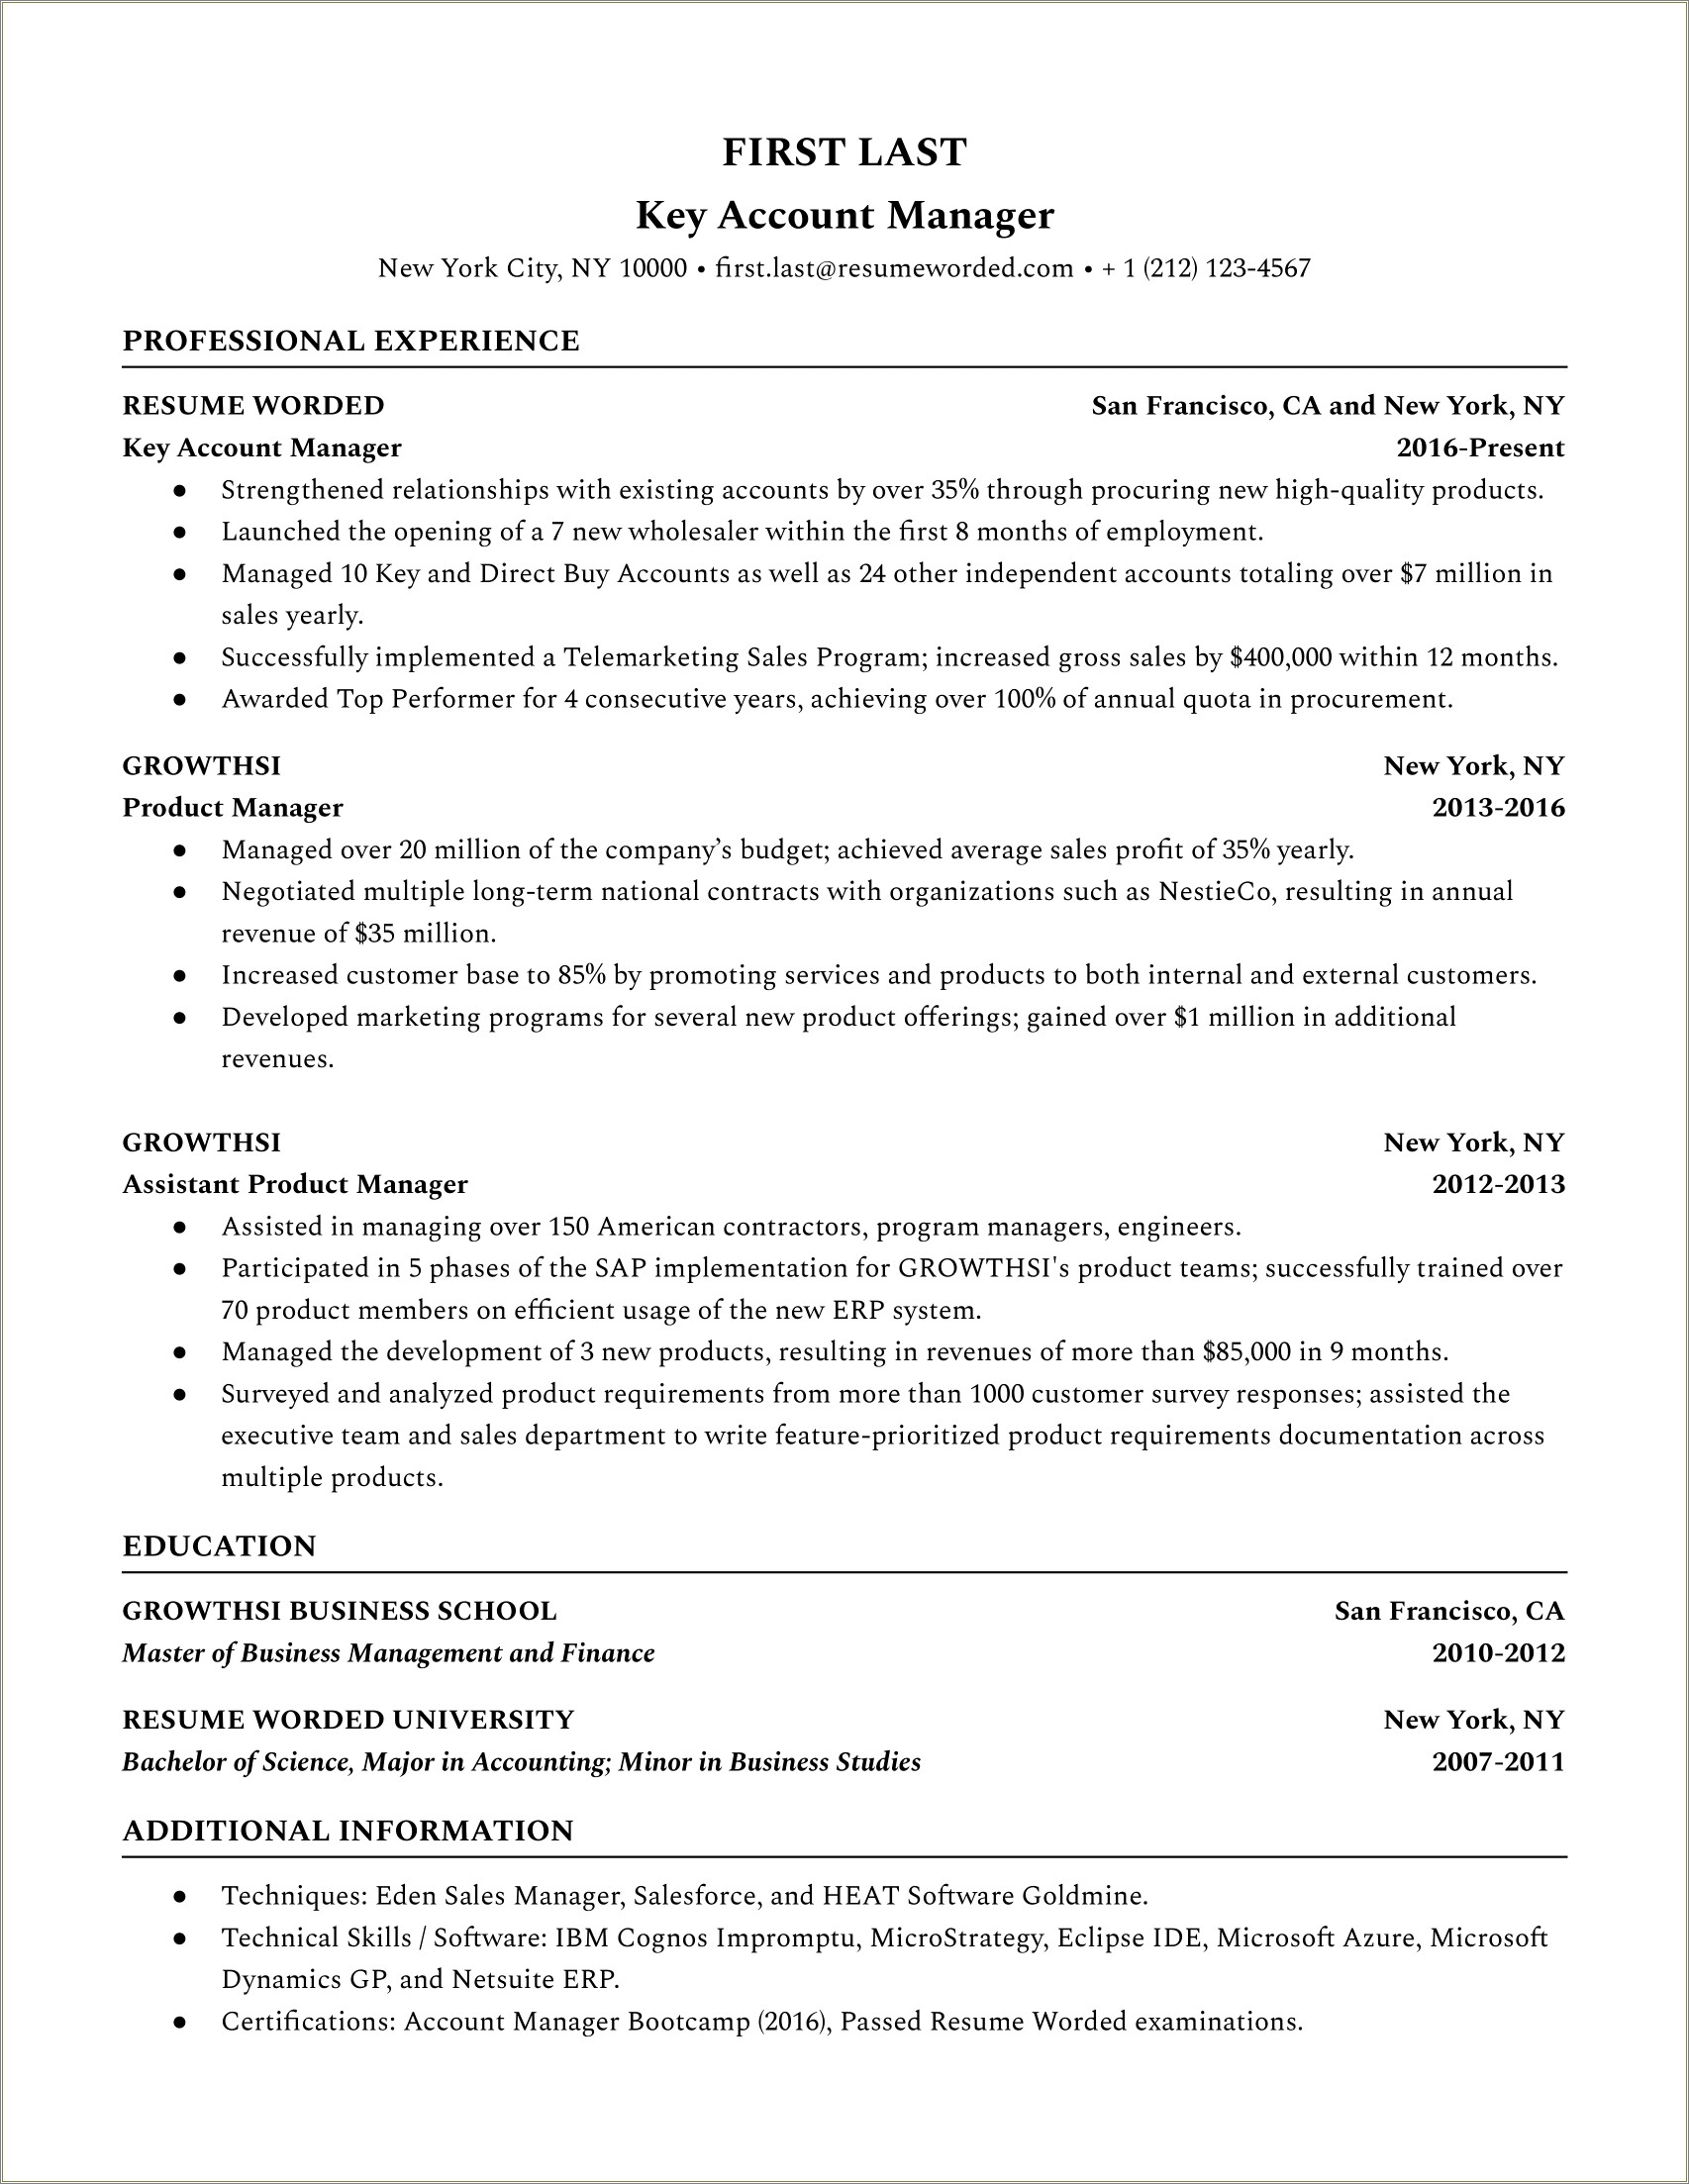 Resume Summary For National Account Manager